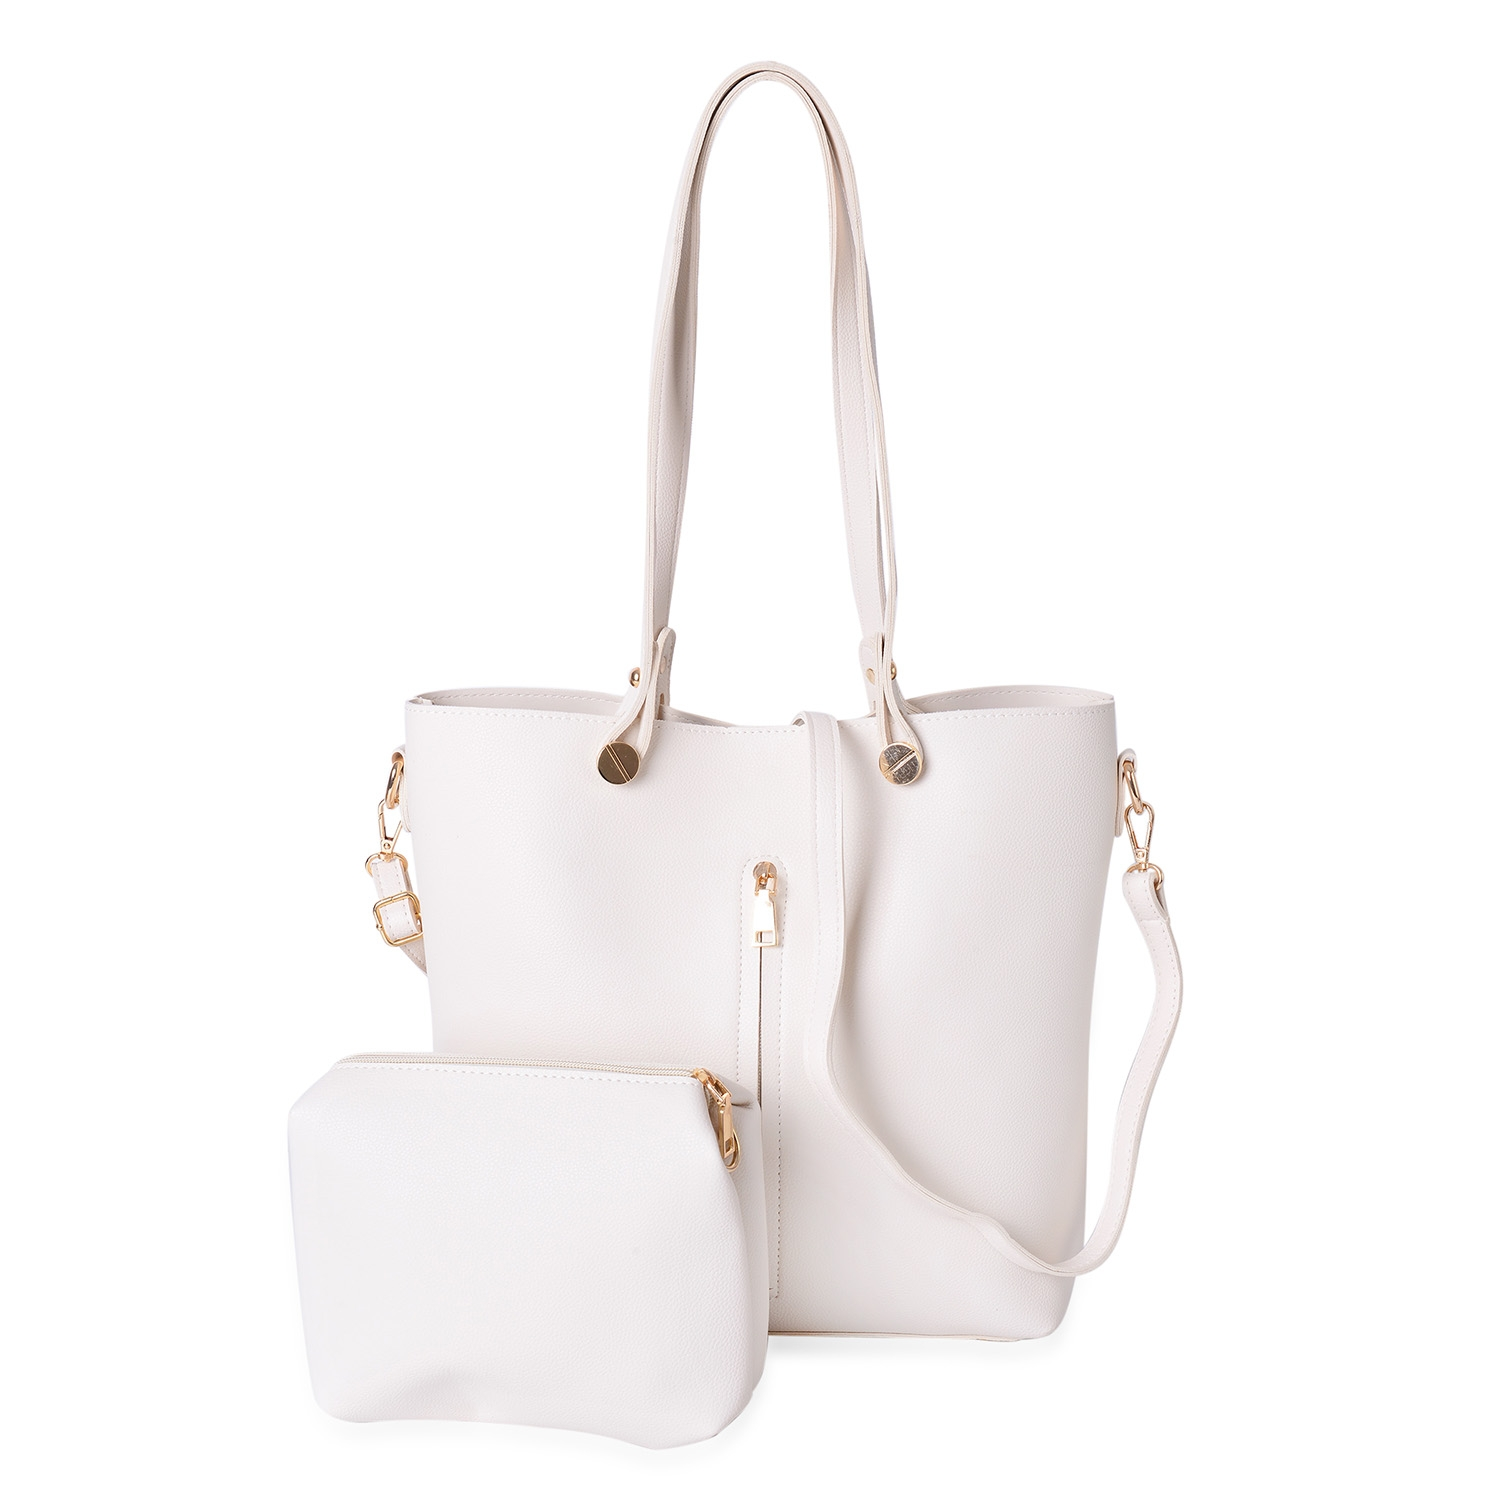 Madame CJ Vegan Leather Tote with pouch in Cream - Houzz of DVA Boutique